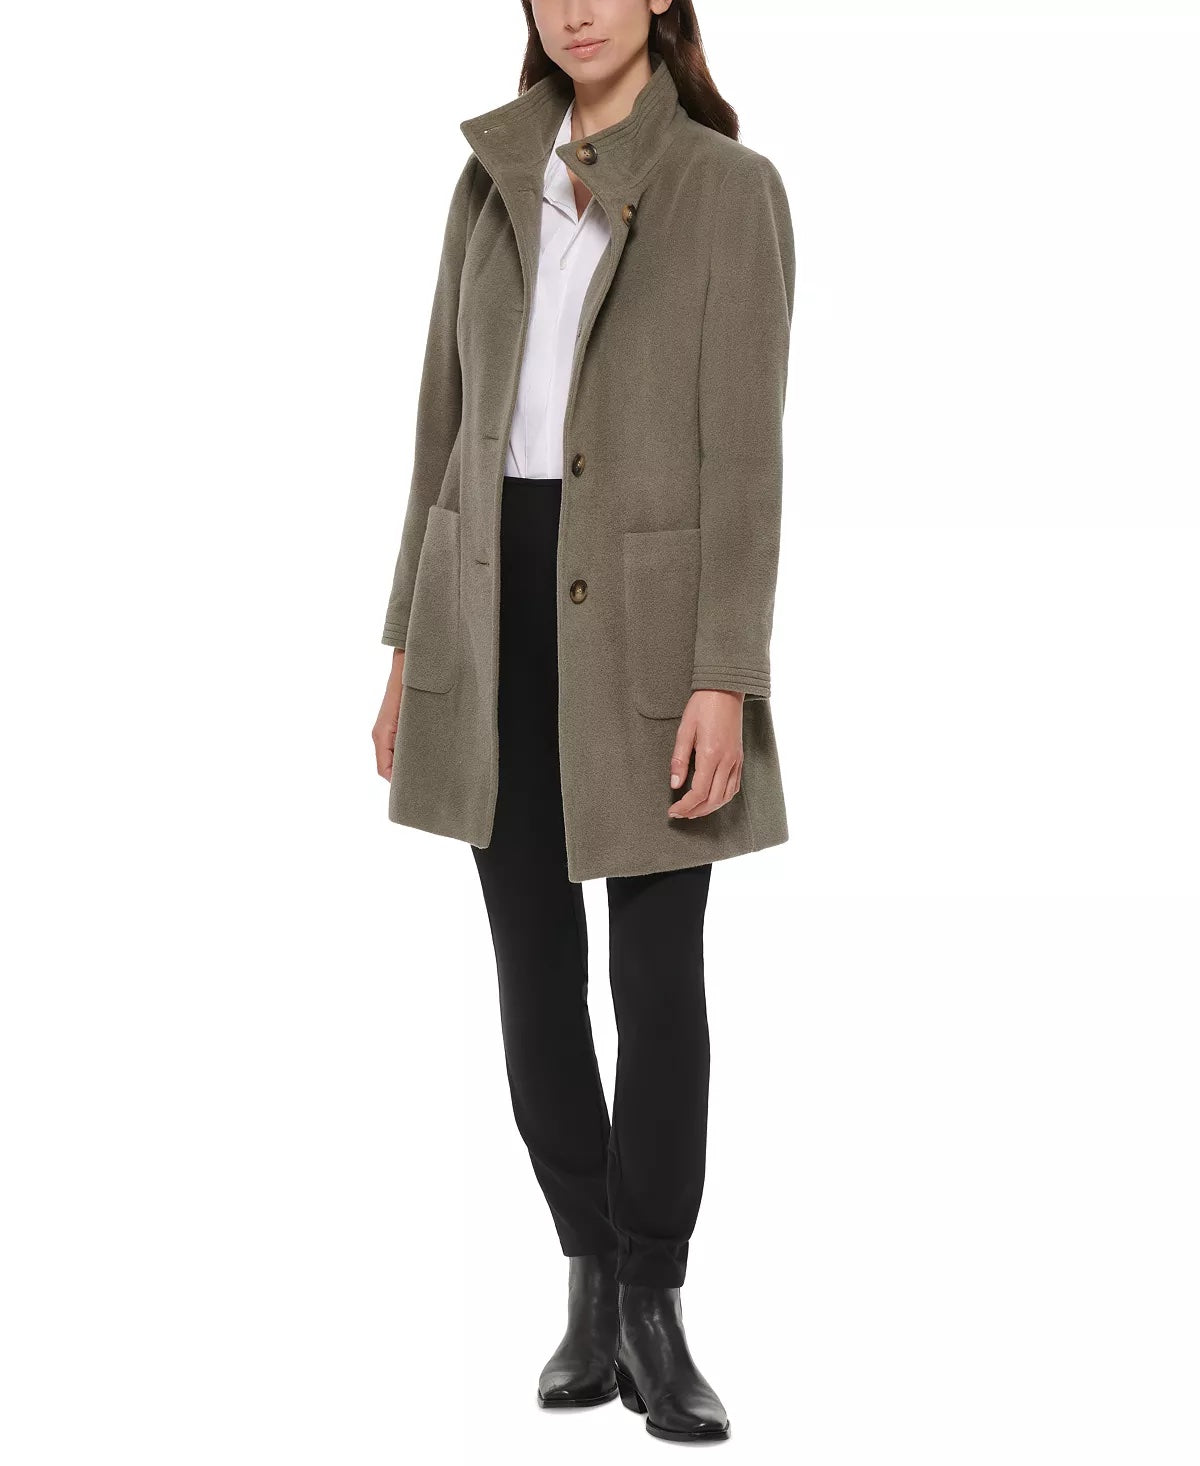 DKNY Women's Stand-Collar Button-Front Belted Coat Sage Green XS